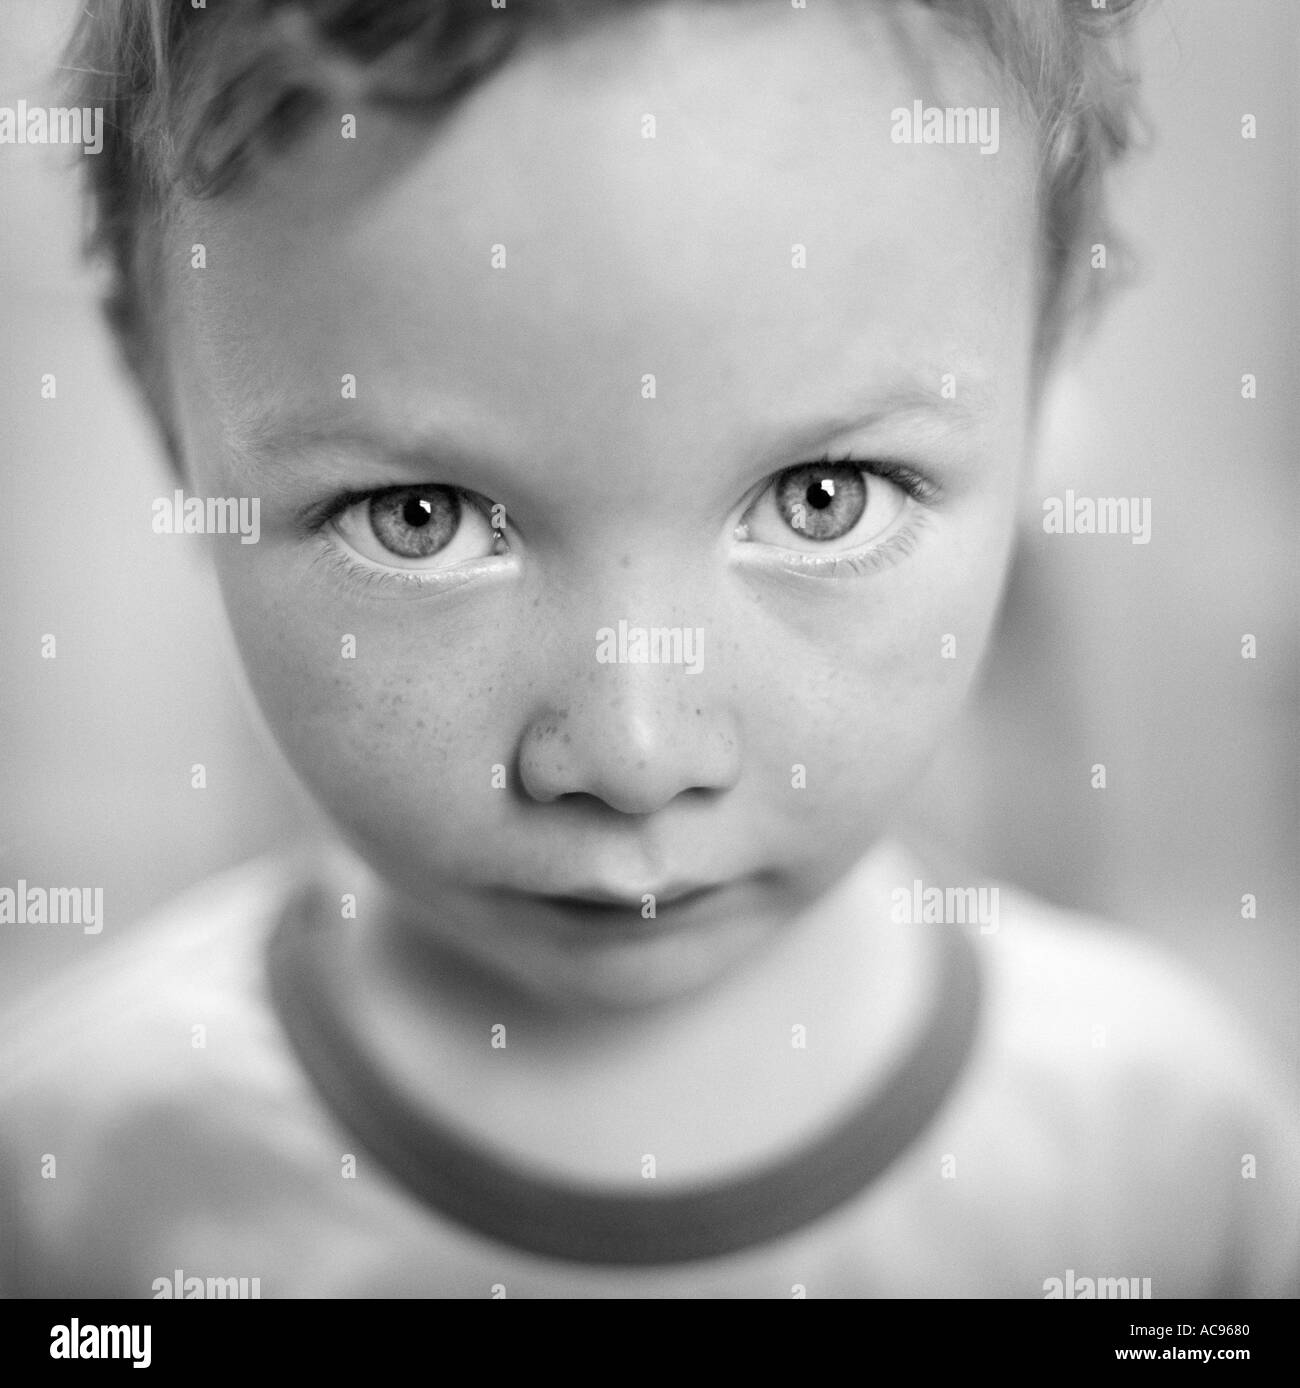 white boy with freckled skin looking at the camera aged four with intense gaze Stock Photo